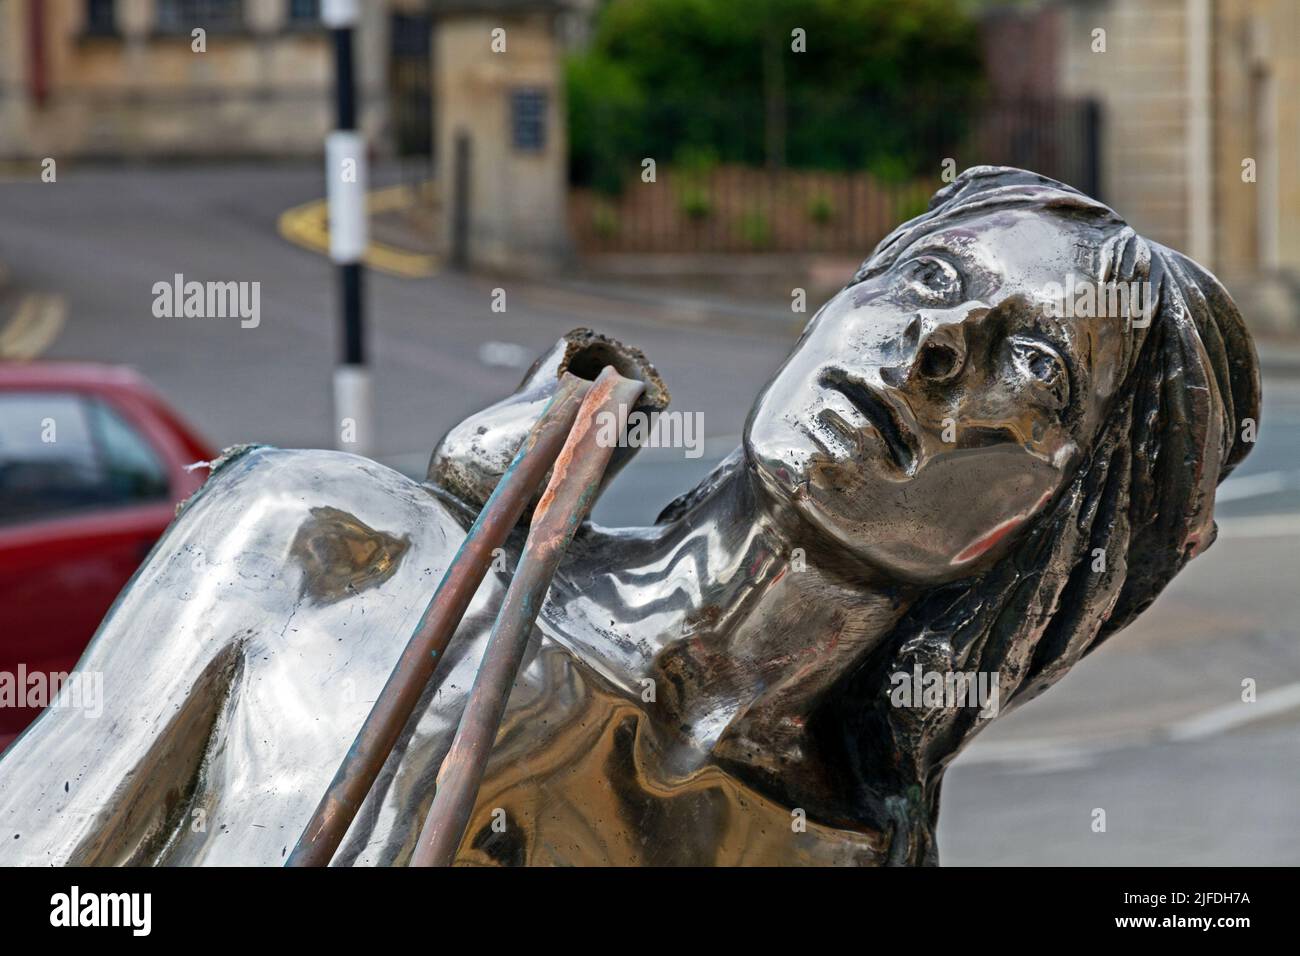 The lower part of David Backhouse’s sculpture “Aspiration” outside the Royal Weston of England Academy in Bristol, UK on 31 May 2011. The sculpture had been broken when a vandal climbed on it several days earlier. Stock Photo